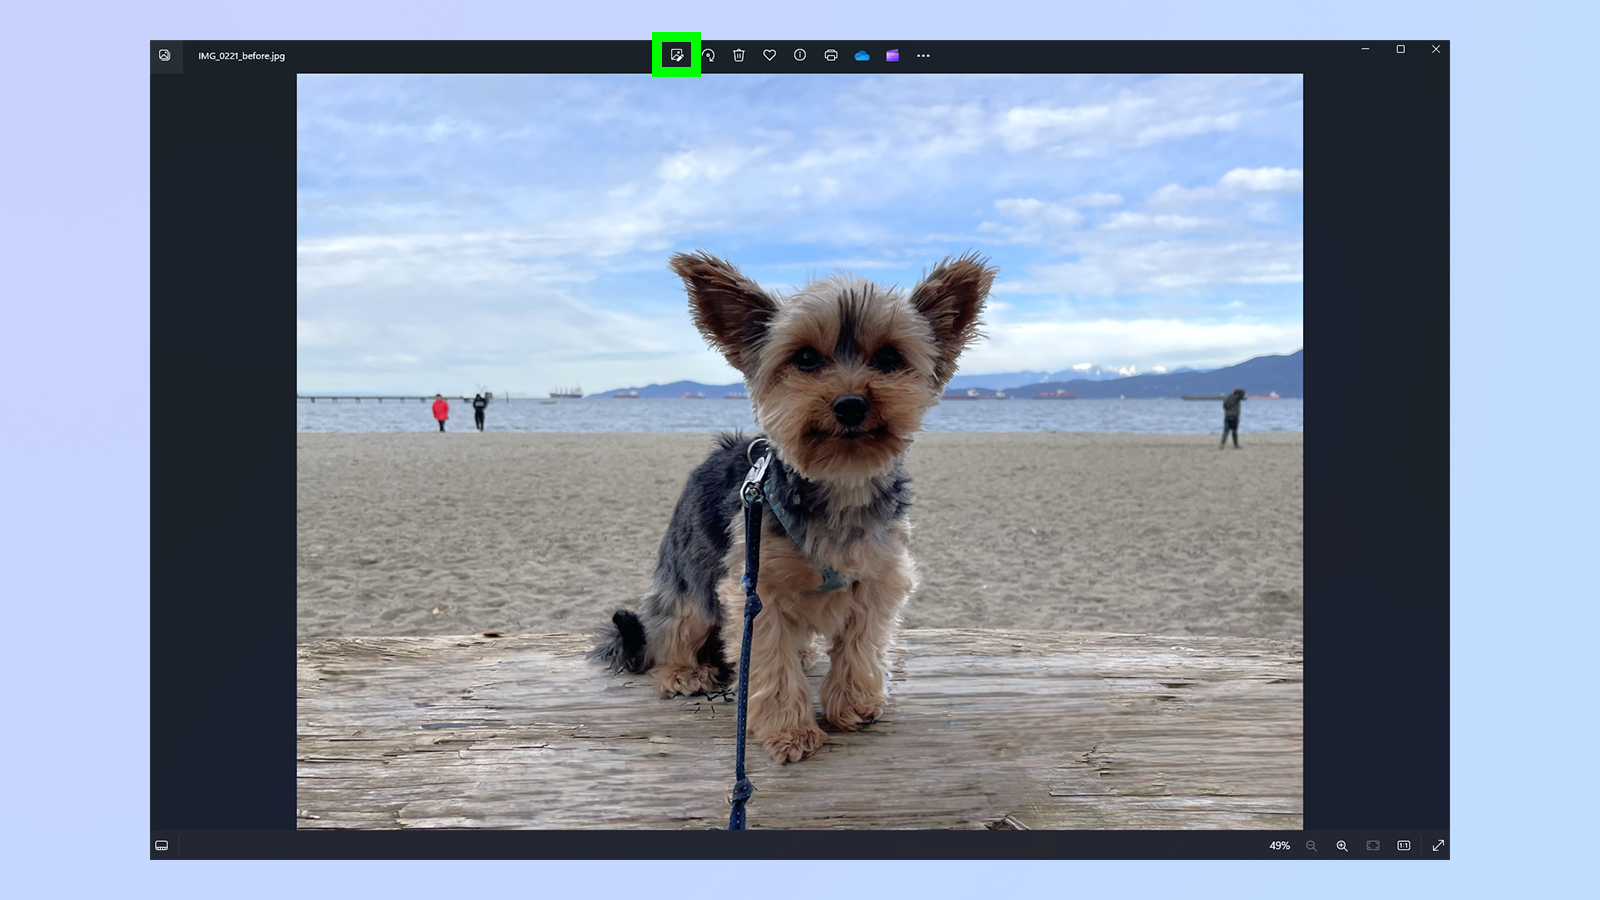 A screenshot showing how to use Generative erase in MS Photos